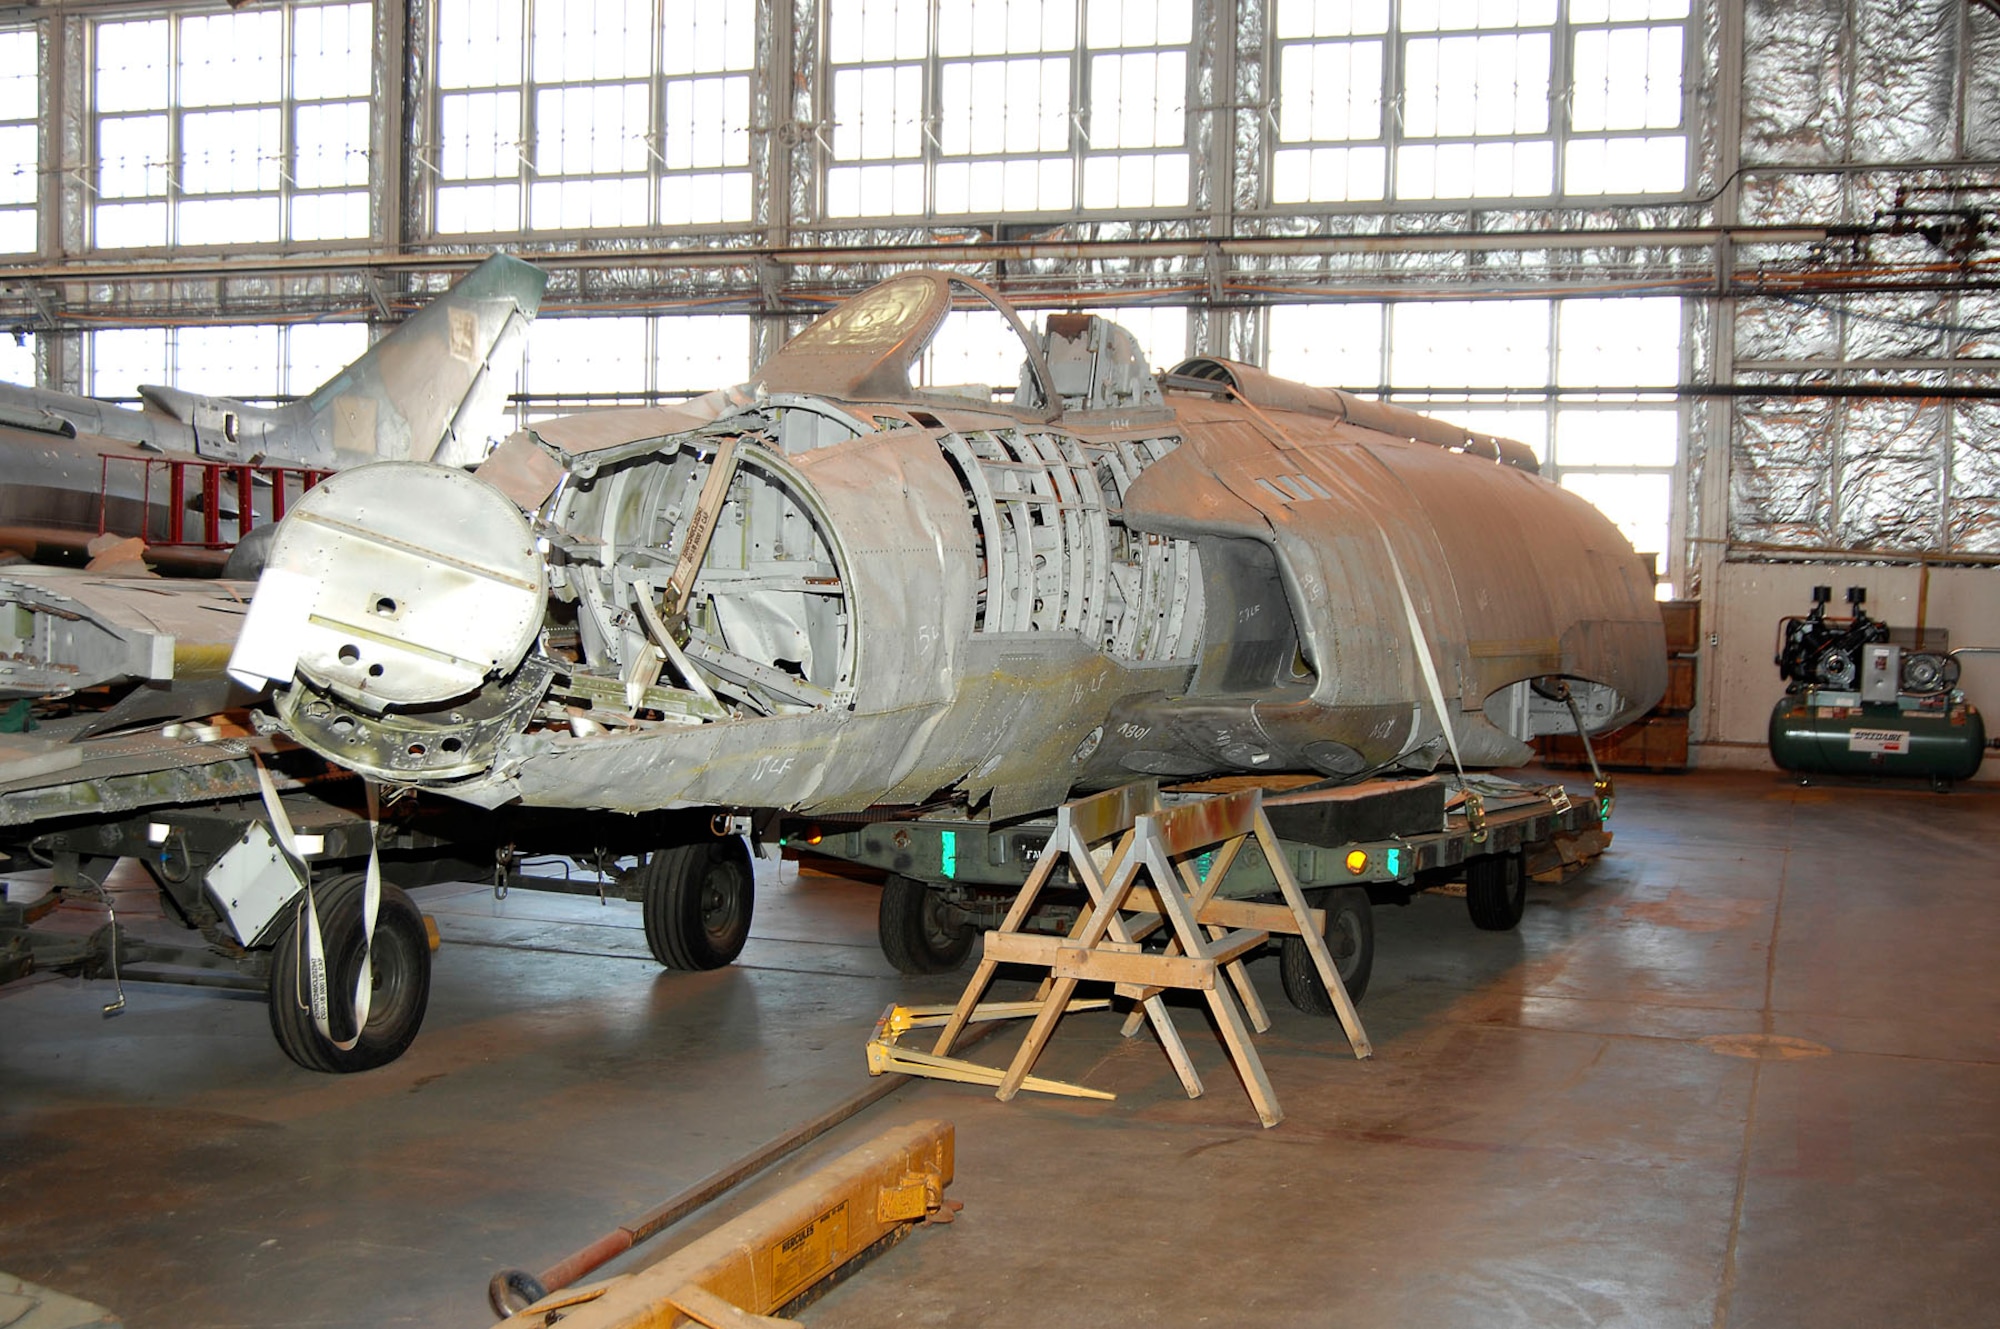 DAYTON, Ohio (02/2007) -- The Lockheed XF-90 awaits restoration at the National Museum of the U.S. Air Force. (U.S. Air Force photo)